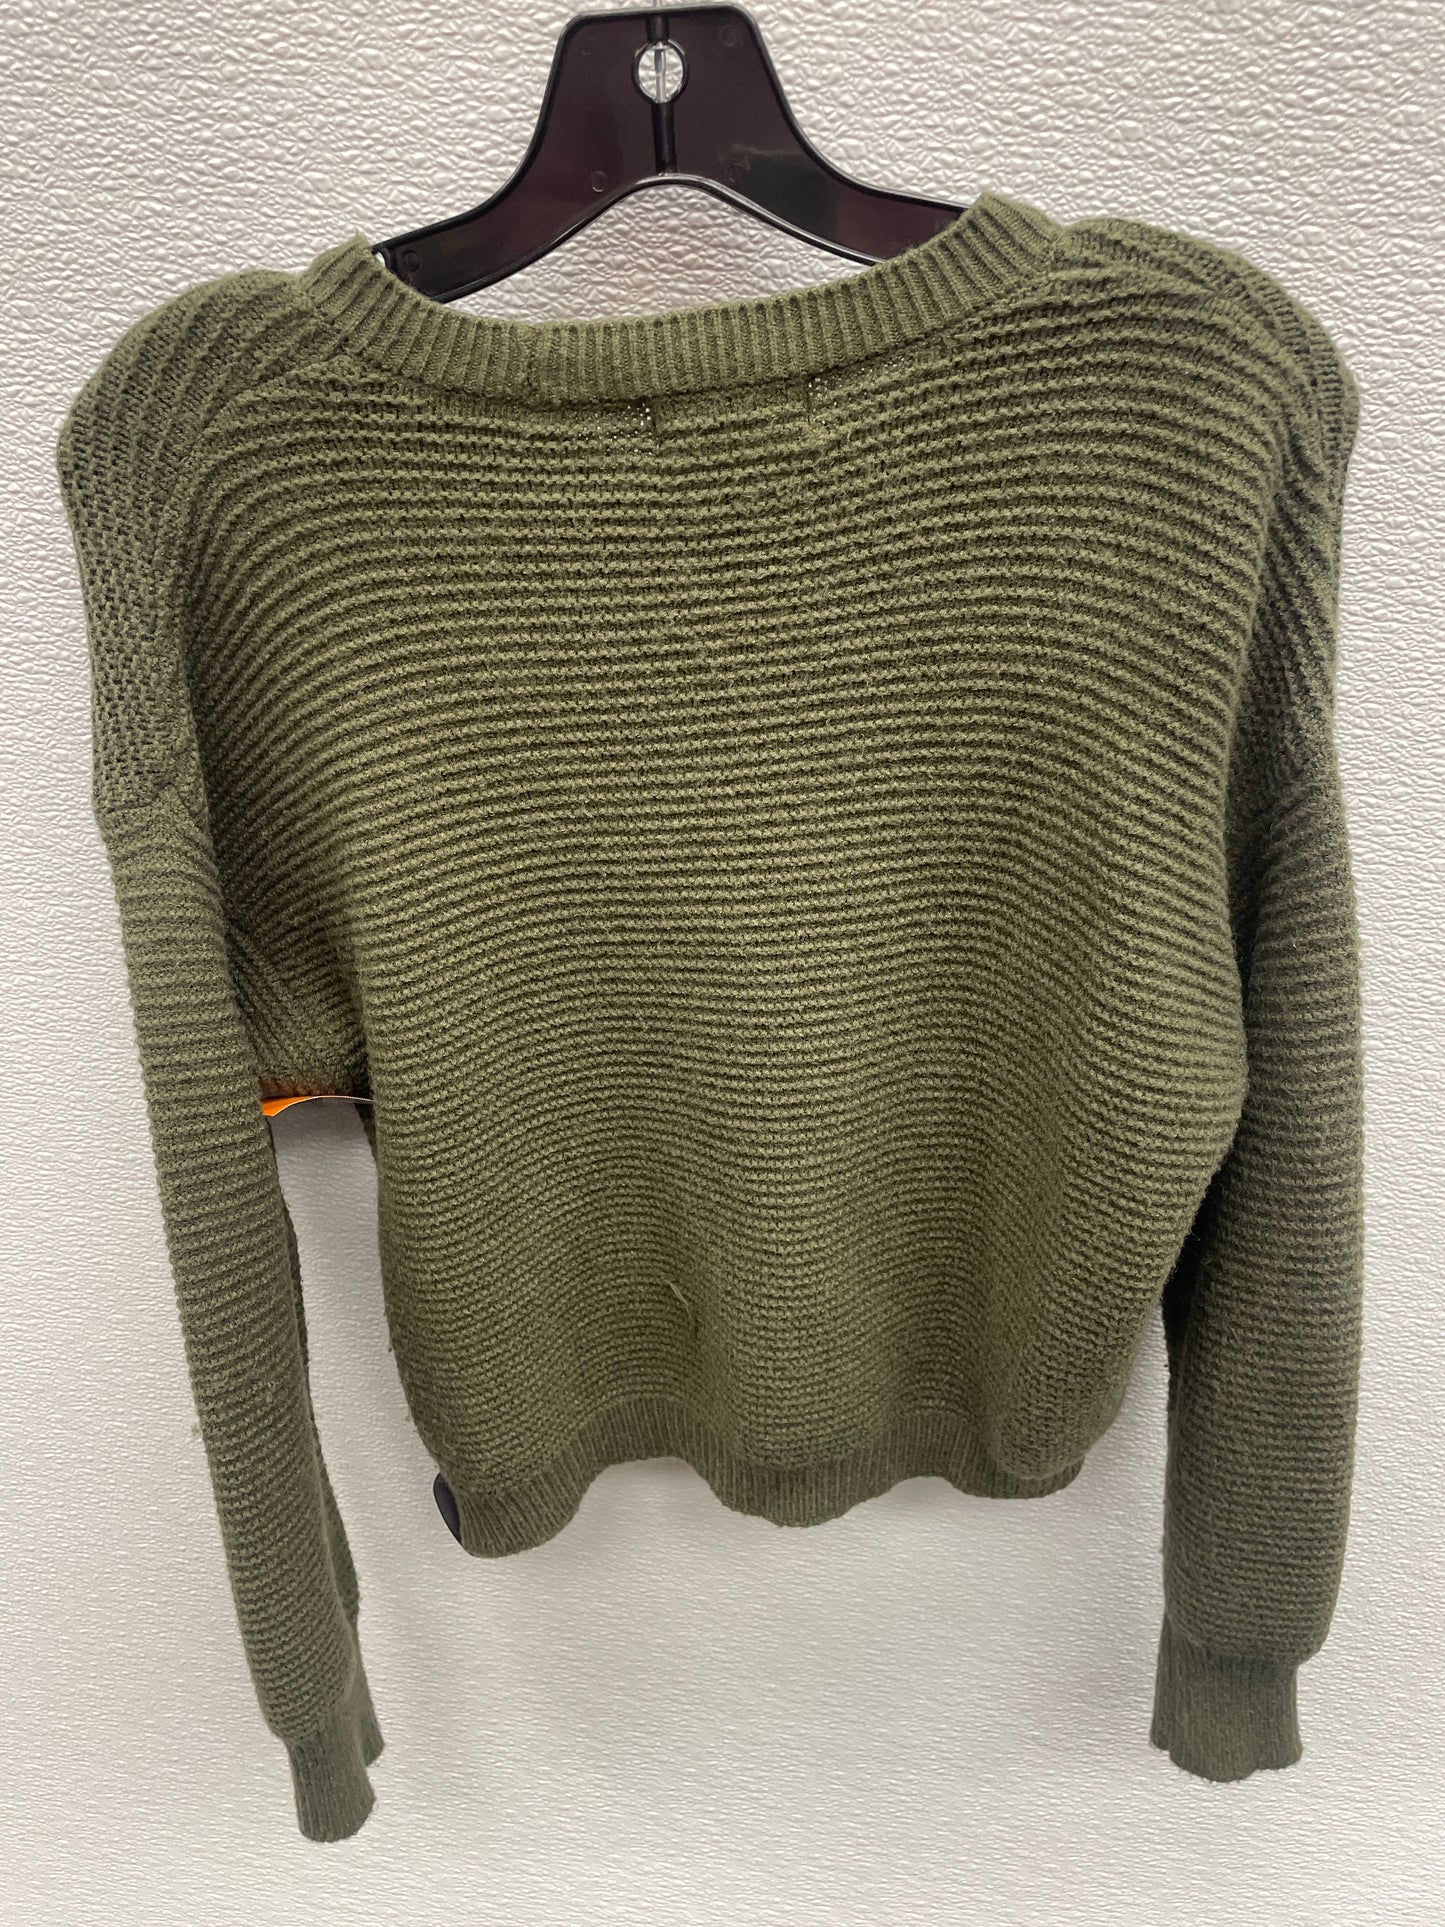 Sweater By Poof  Size: M